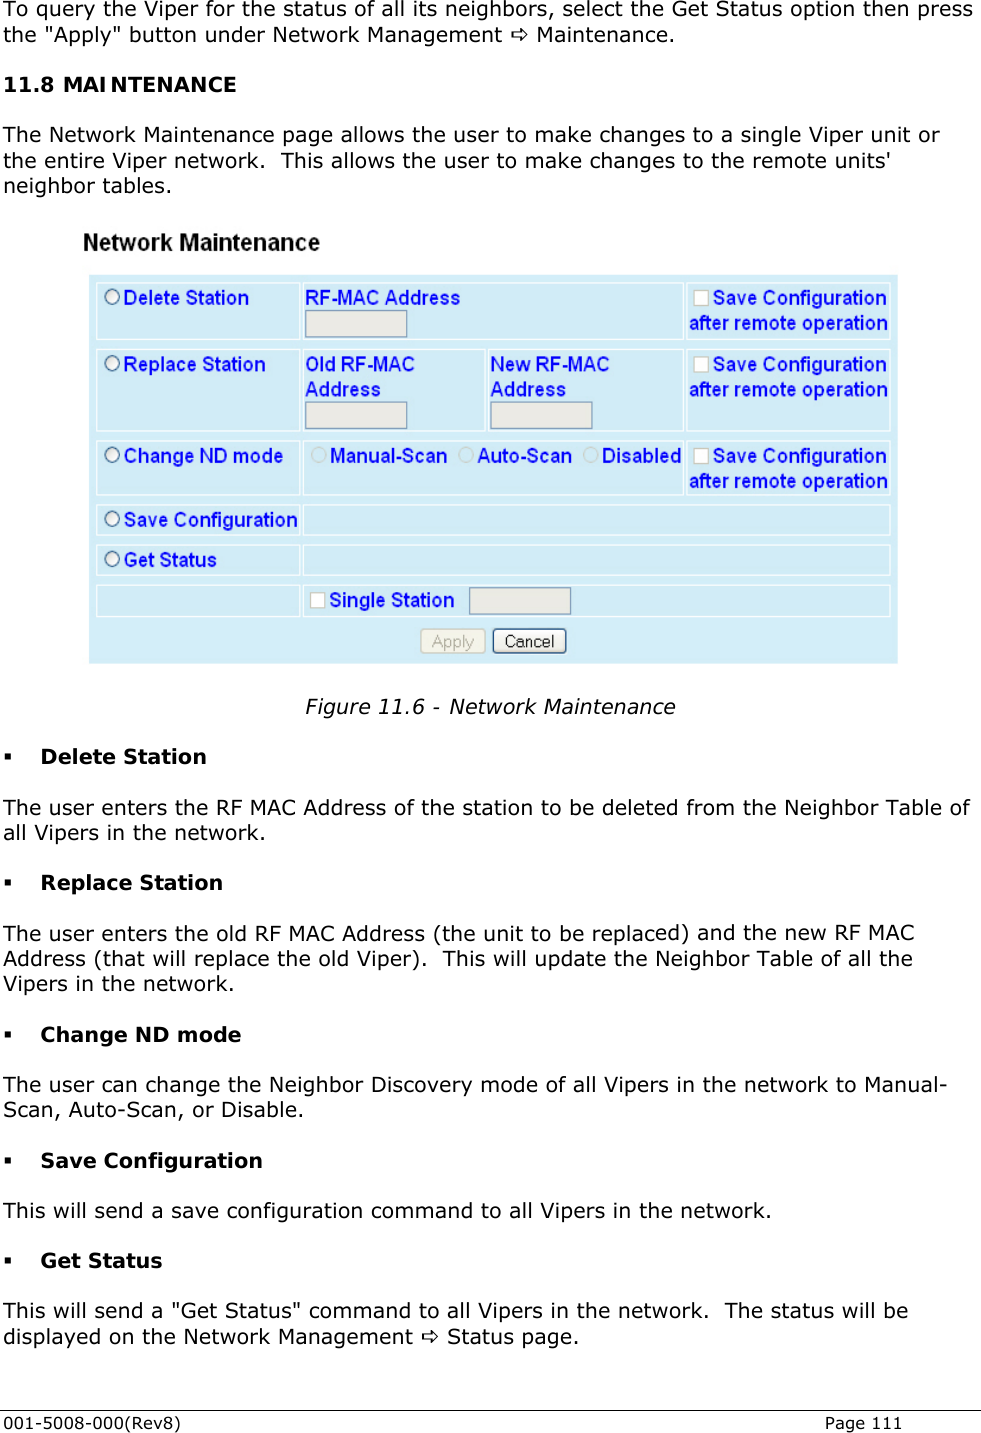   To query the Viper for the status of all its neighbors, select the Get Status option then press 1.8 MAINTENANCE The Network Maintenance page allows the user to make changes to a single Viper unit or the entire Viper network.  This allows the user to make changes to the remote units&apos; neighbor tables. the &quot;Apply&quot; button under Network Management D Maintenance. 1 Figure 11.6 - Network Maintenance f ation  ed) and the new RF MAC Address (that will replace the old Viper).  This will update the Neighbor Table of all the l- Save Configuration This will send a save configuration command to all Vipers in the network.  Get Status This will send a &quot;Get Status&quot; command to all Vipers in the network.  The status will be displayed on the Network Management D Status page.  Delete Station  The user enters the RF MAC Address of the station to be deleted from the Neighbor Table oall Vipers in the network.  Replace StThe user enters the old RF MAC Address (the unit to be replacVipers in the network.  Change ND mode The user can change the Neighbor Discovery mode of all Vipers in the network to ManuaScan, Auto-Scan, or Disable. 001-5008-000(Rev8)   Page 111 